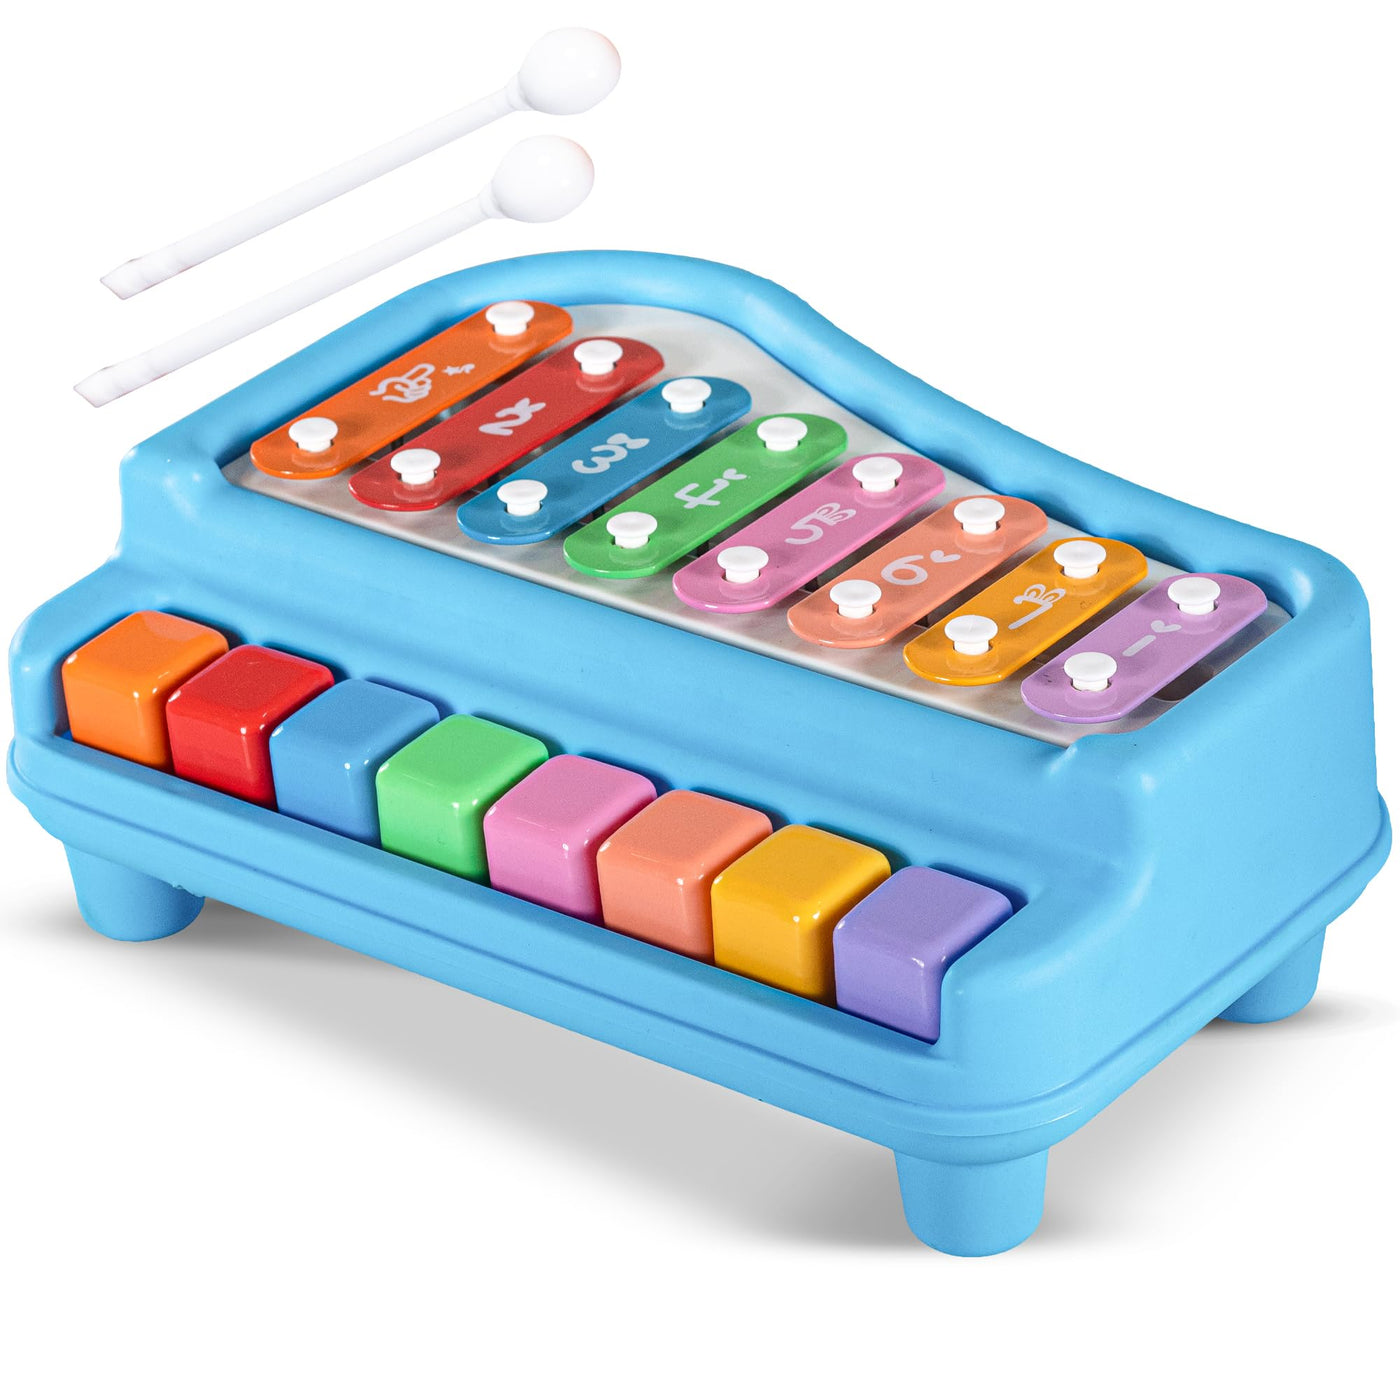 Best Music Gifts for Kids: Top Musical Toys, Instruments for Children